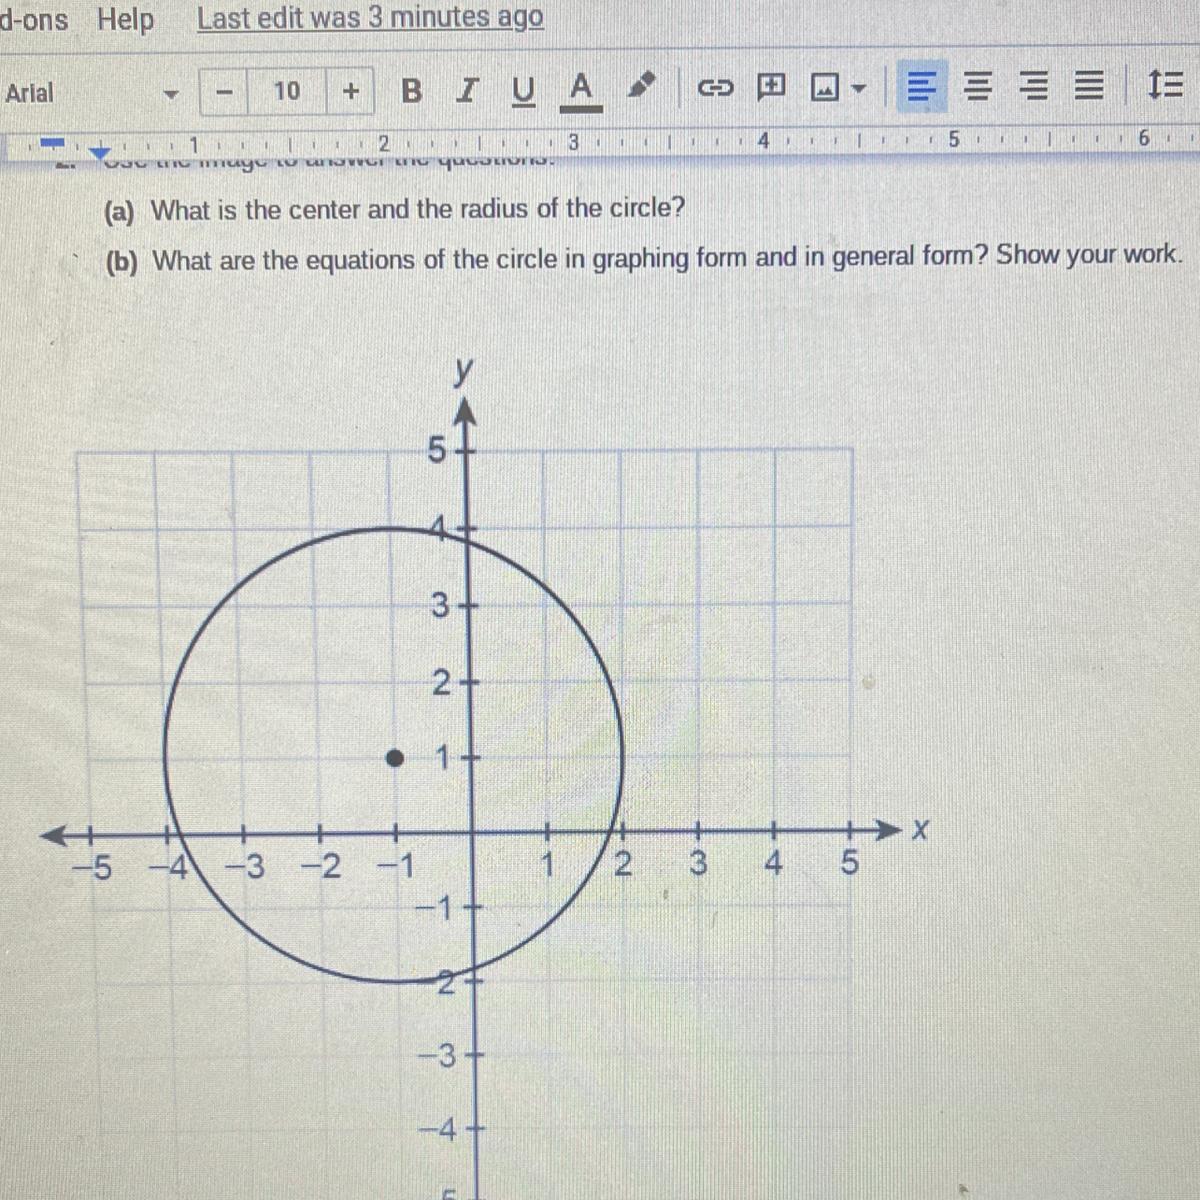 Help ASAP 2. Use The Image To Answer The Questions.(a) What Is The Center And The Radius Of The Circle?(b)